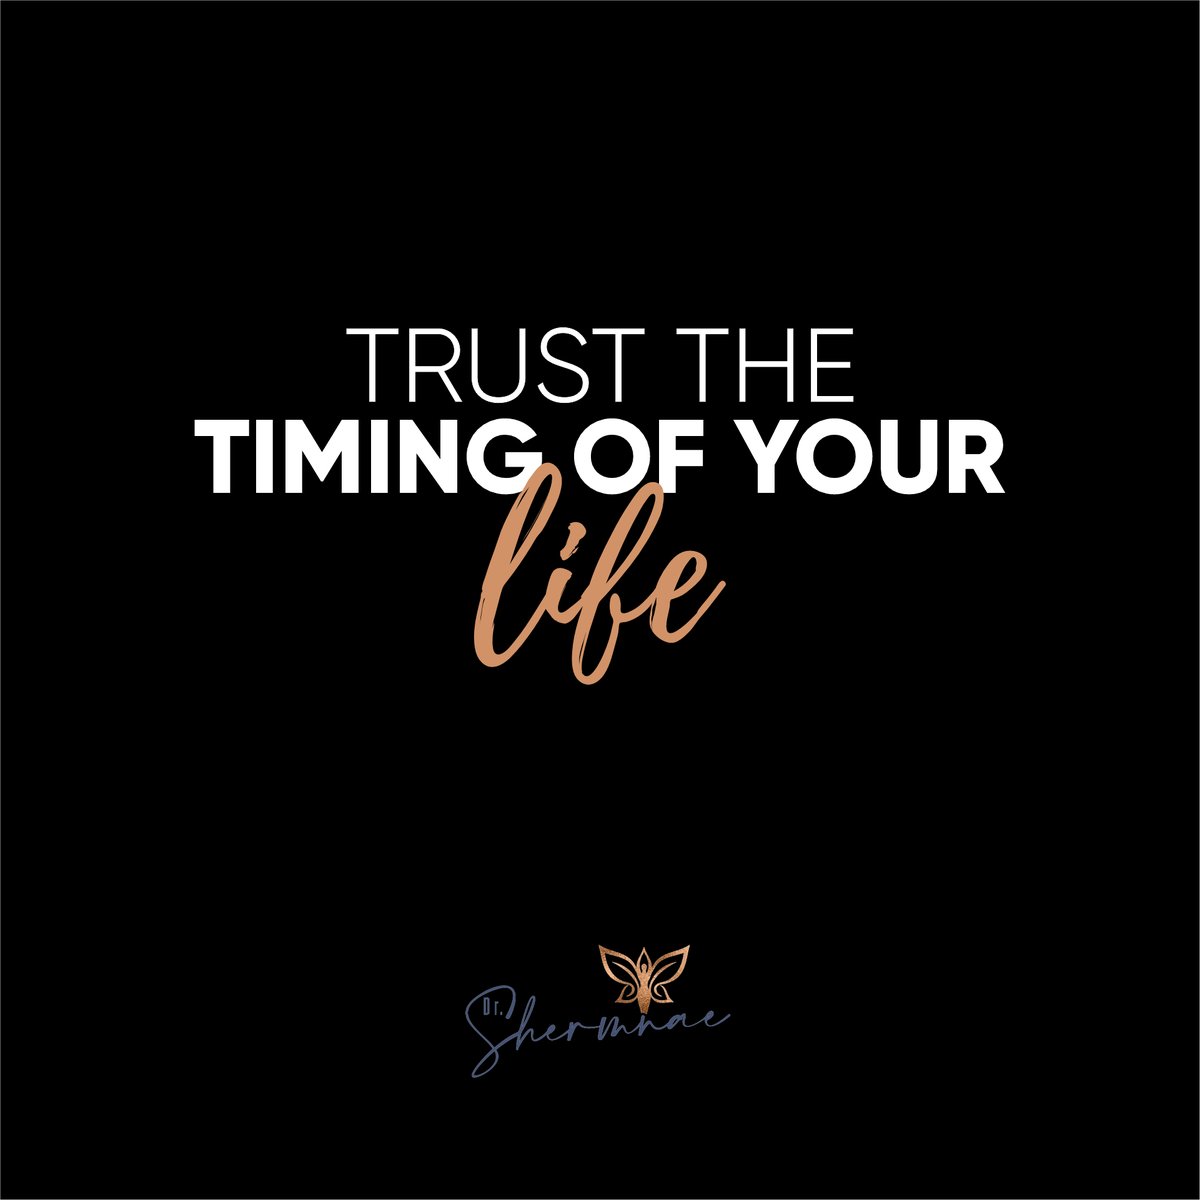 Trust is all it takes, isn’t it??!!

#drshermnae #personalcoach #success #business #inspiration #selflove #alignment #transformation #meditation #empaths #selfempowerment #vulnerability #intuition #higherself #intuitive #consciousness #abundance #confidence #motivationmonday